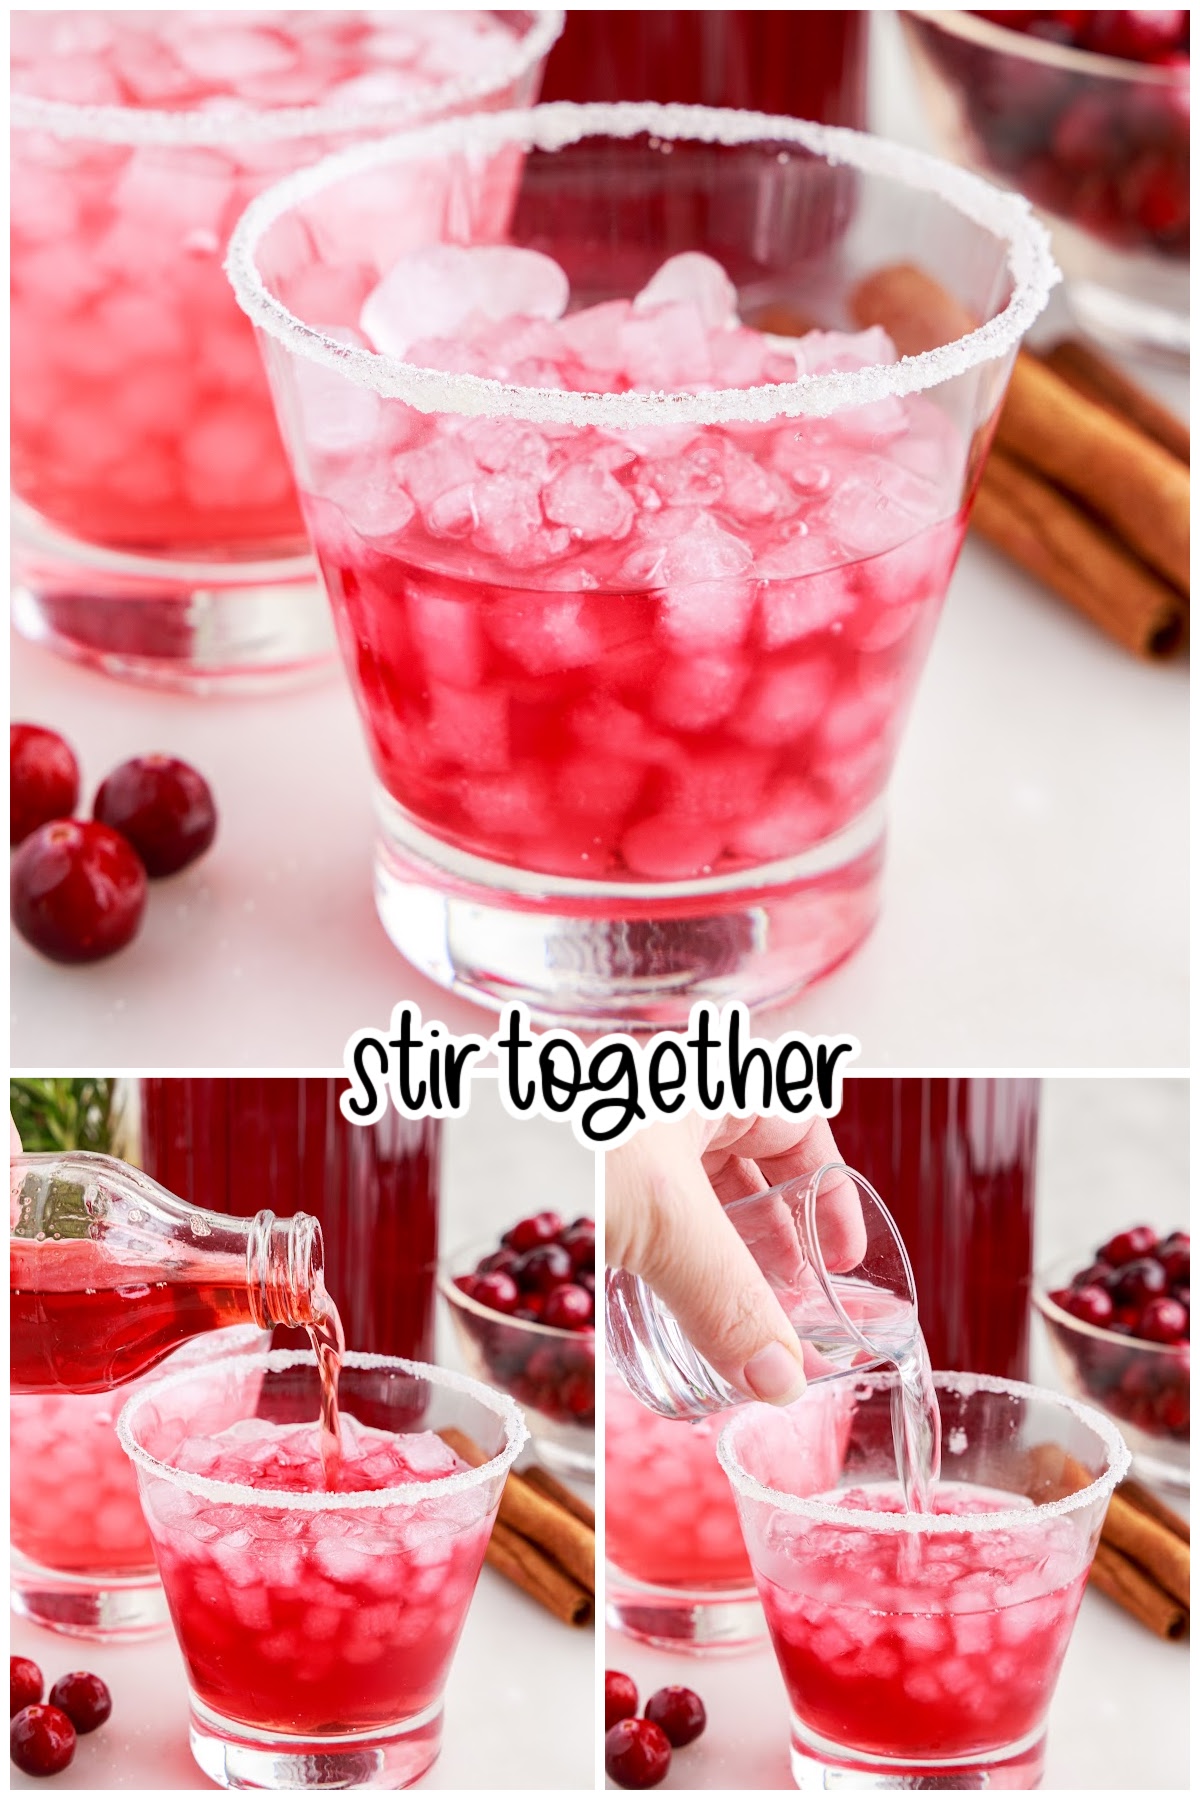 Three images of Christmas Cranberry Cocktails in glasses with text overlay.